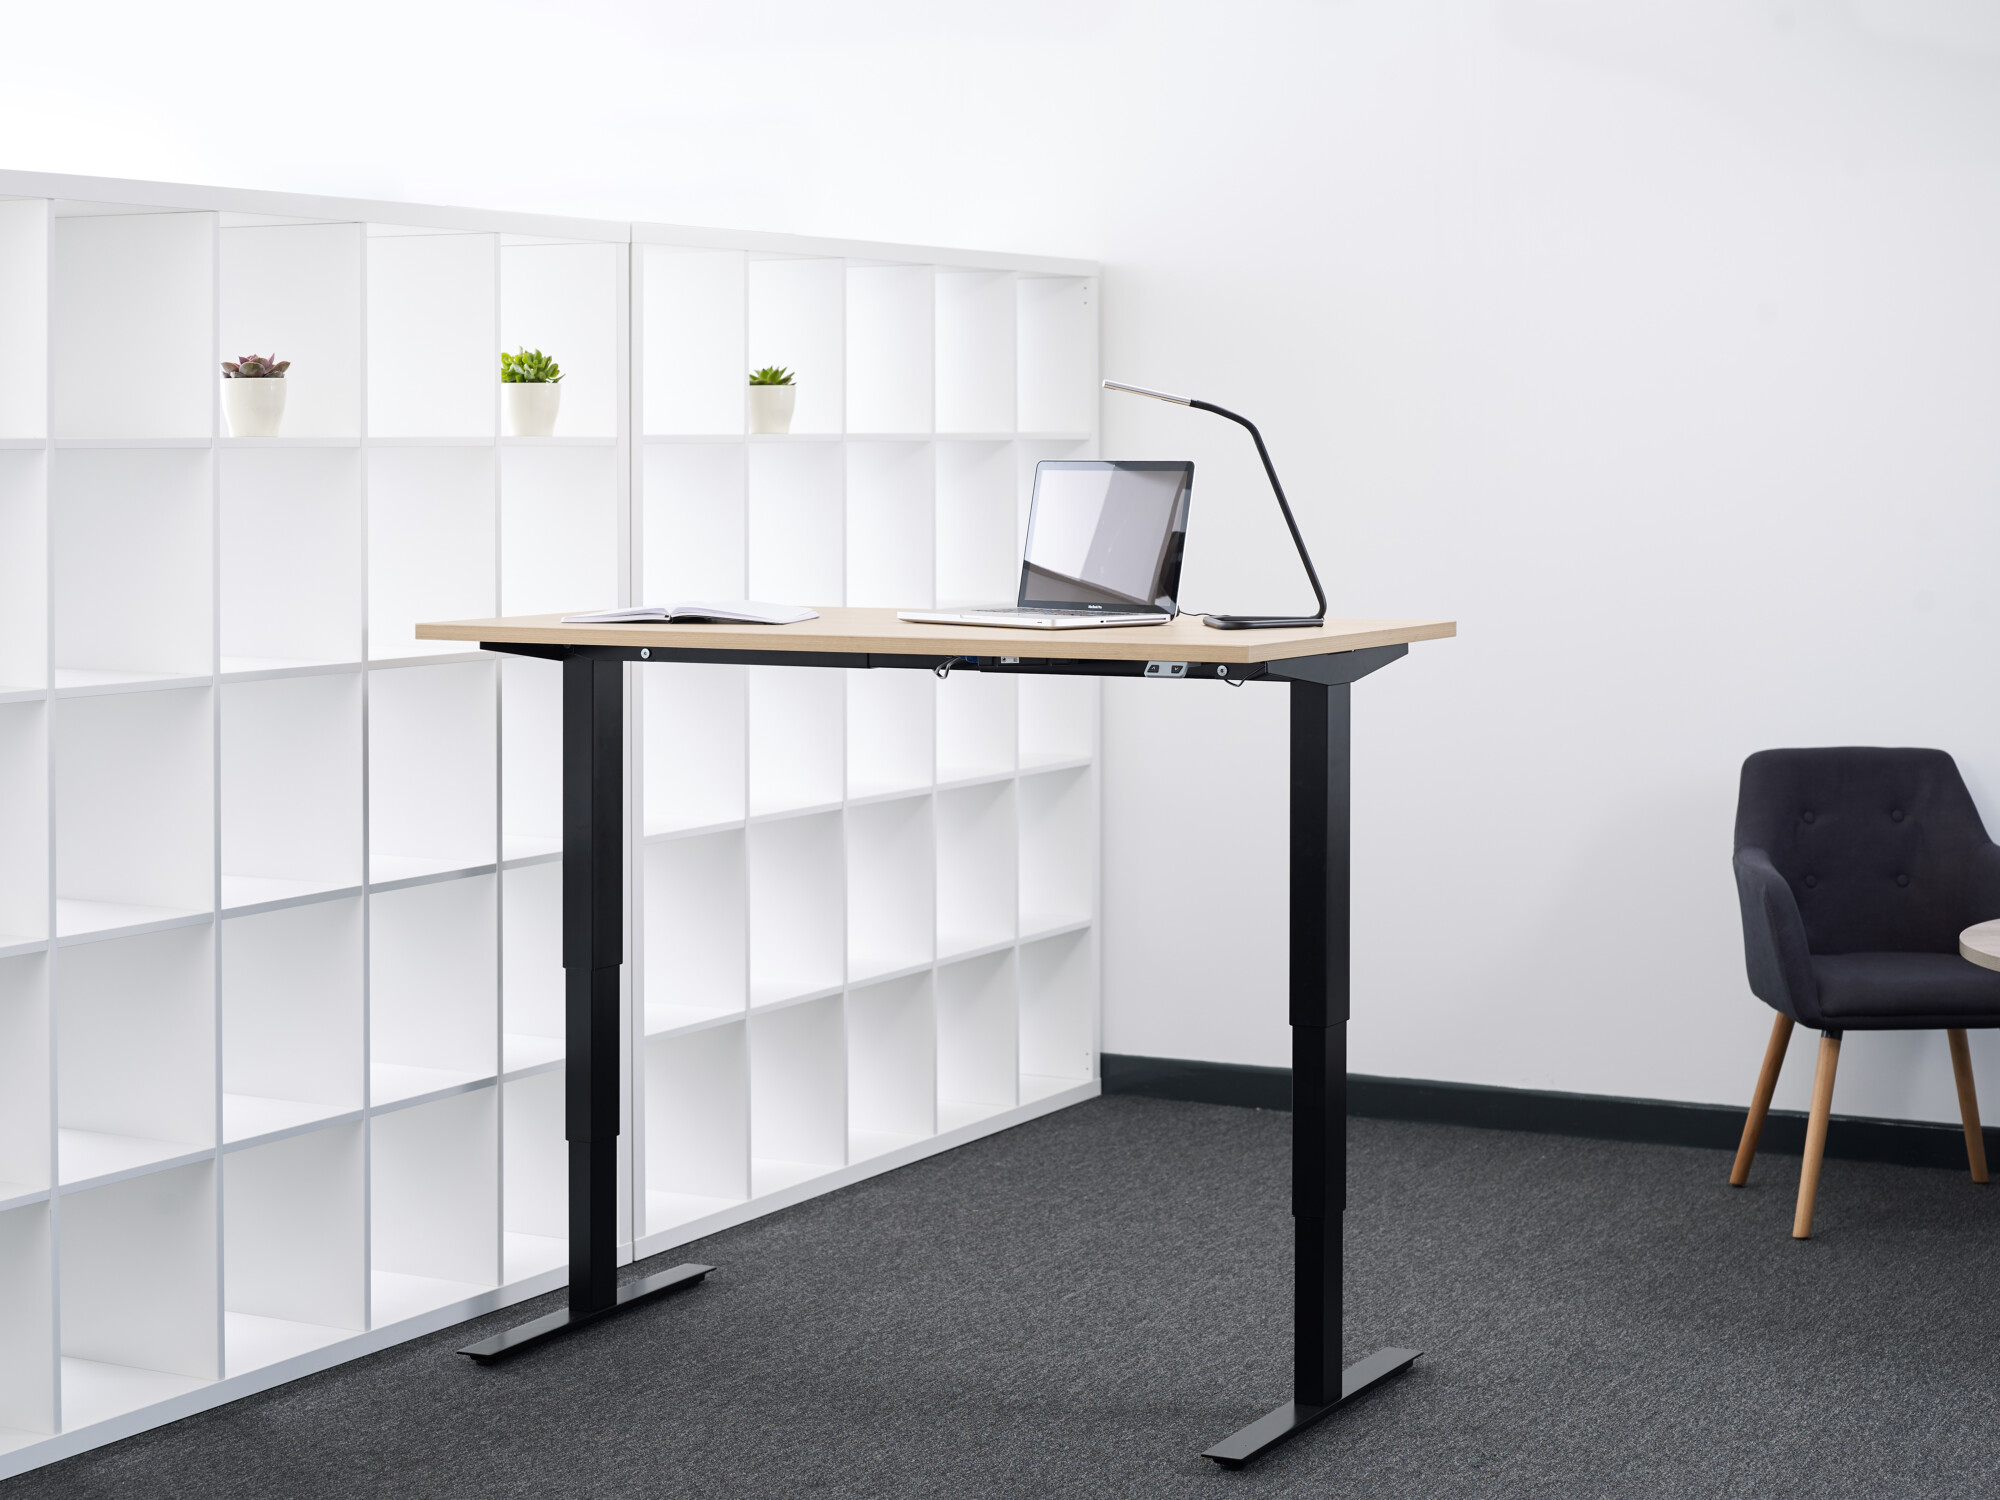 The premium Buro Home White Frame Height Adjustable Desk is available in 6 top finishes, so you can build your dream desk that matches your style.